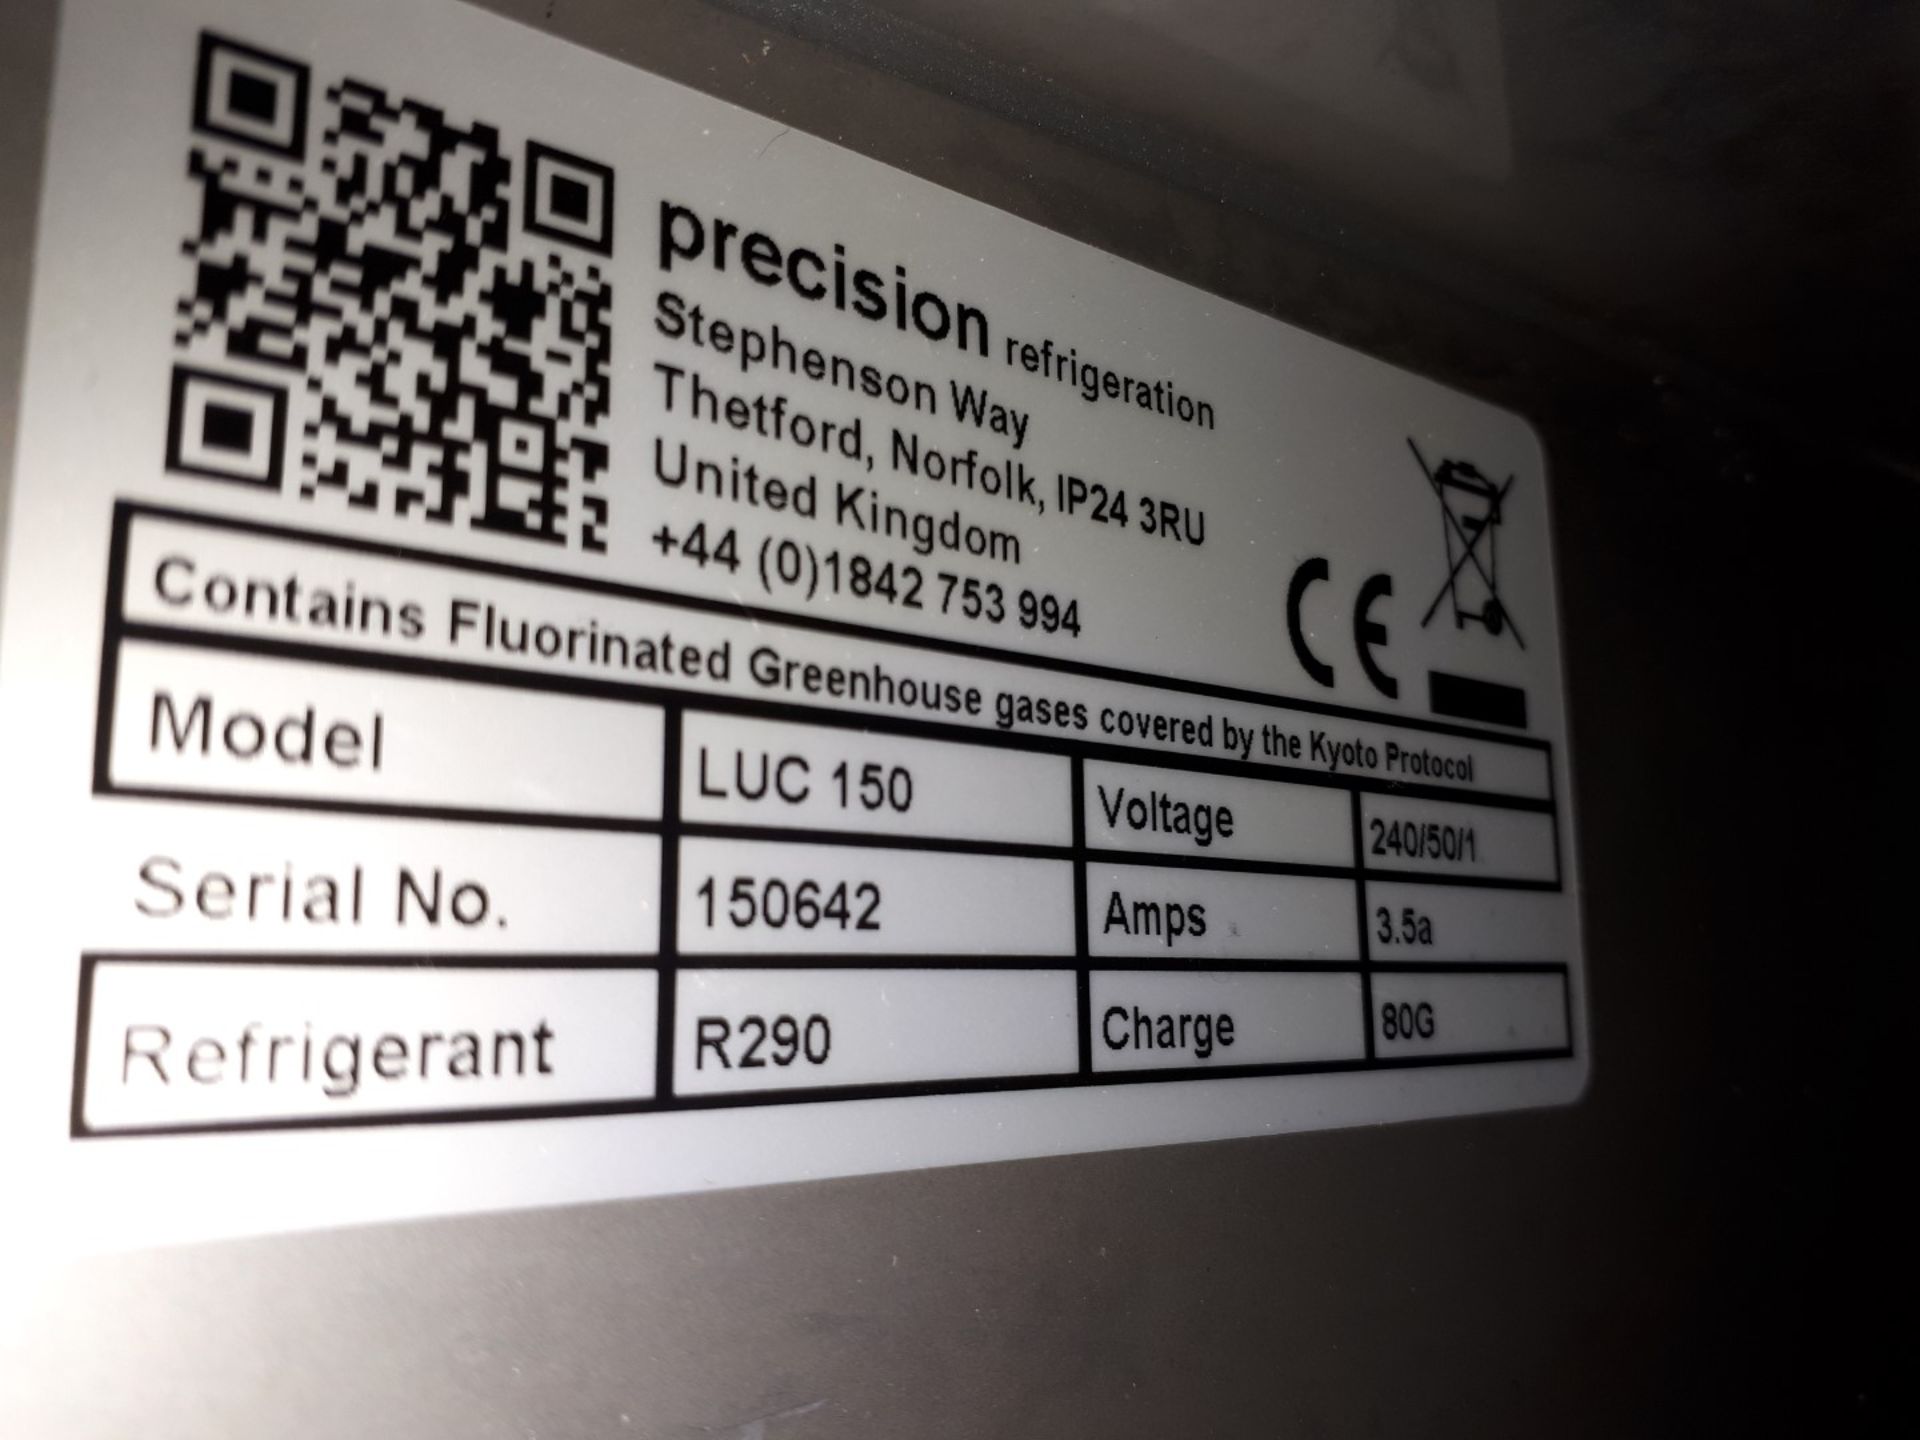 Precision LUC 150 Undercounter Stainless Steel Freezer - Image 4 of 4